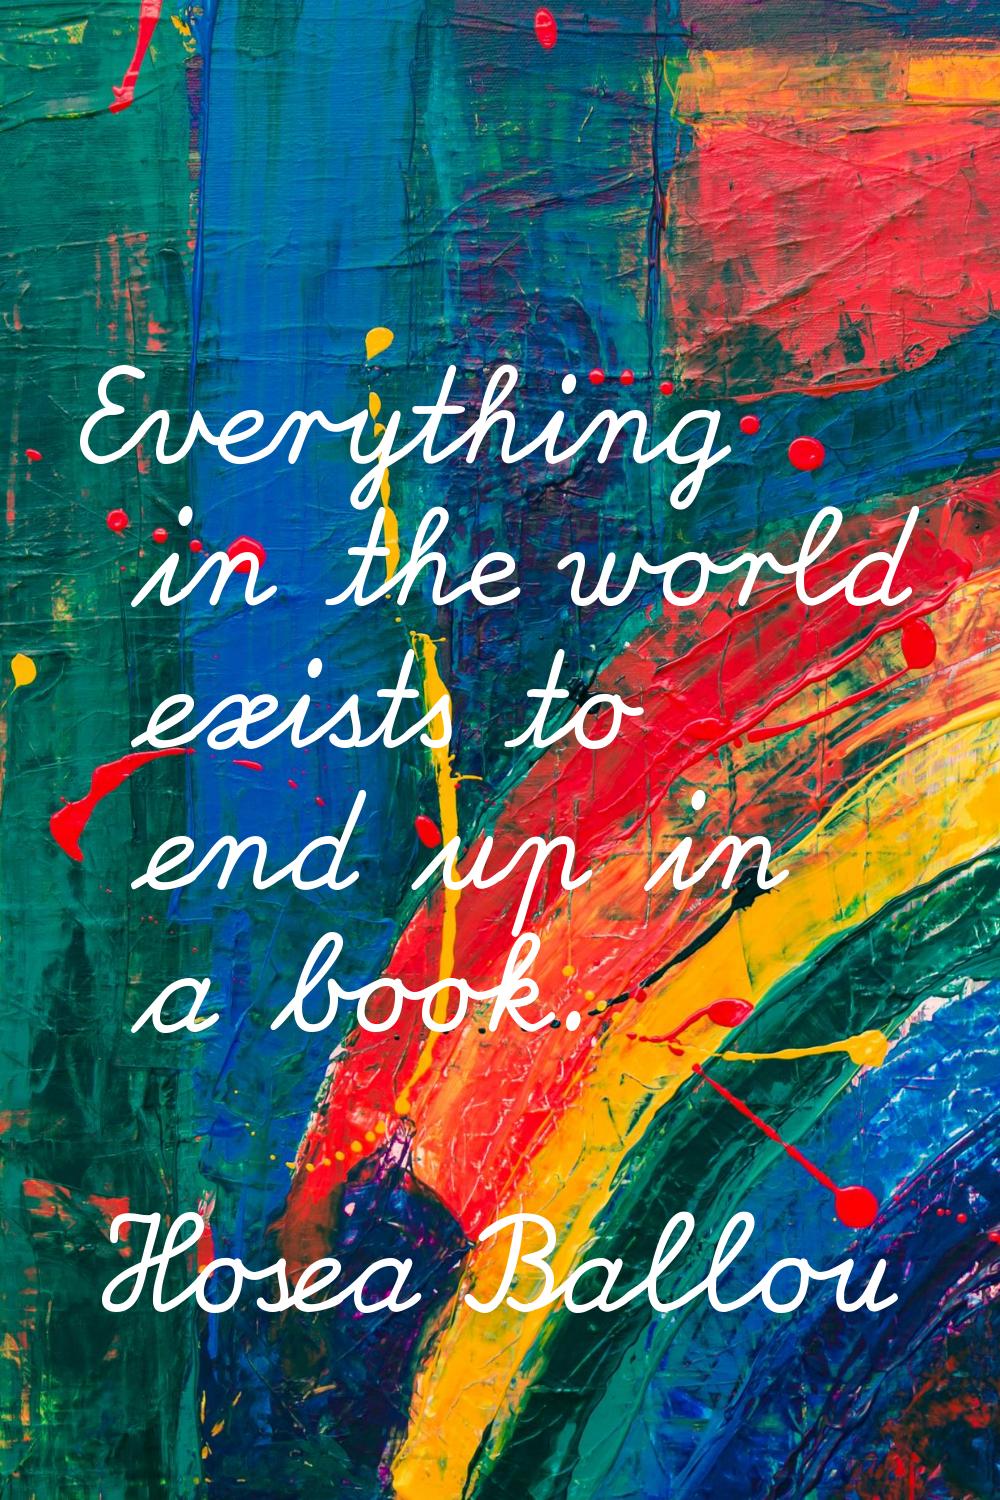 Everything in the world exists to end up in a book.